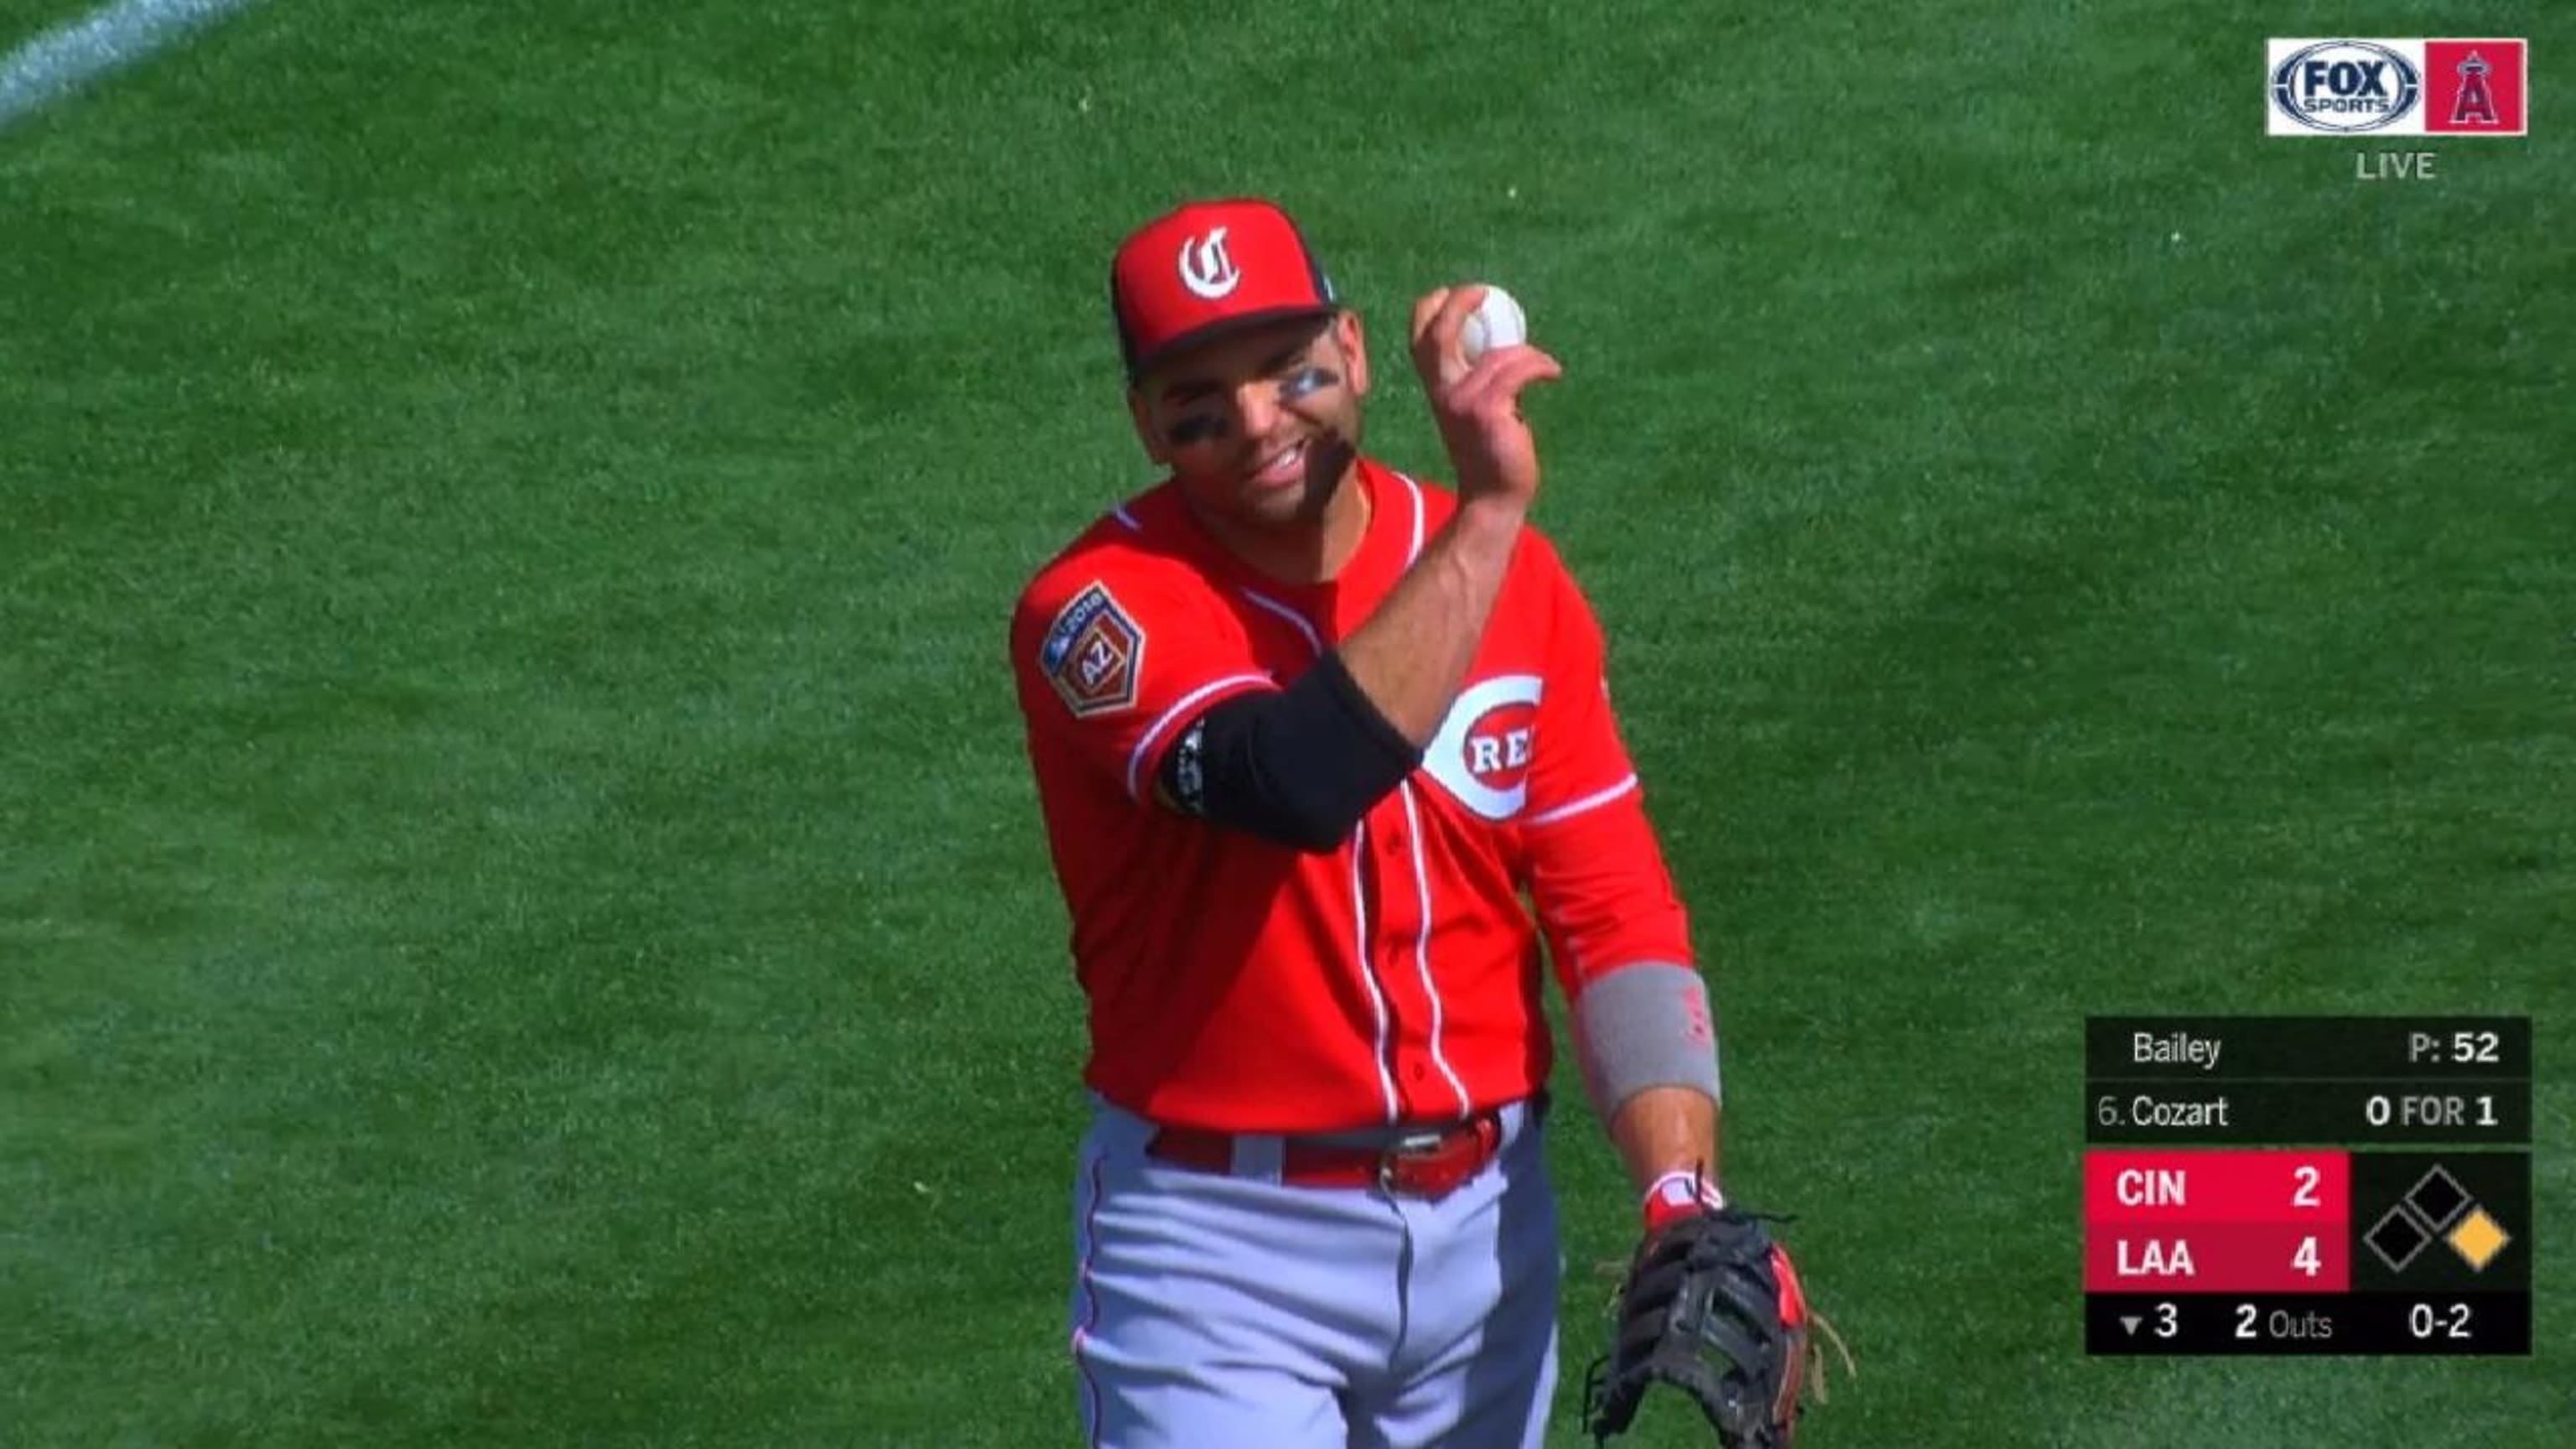 Joey Votto messed with some fans after dropping a foul ball